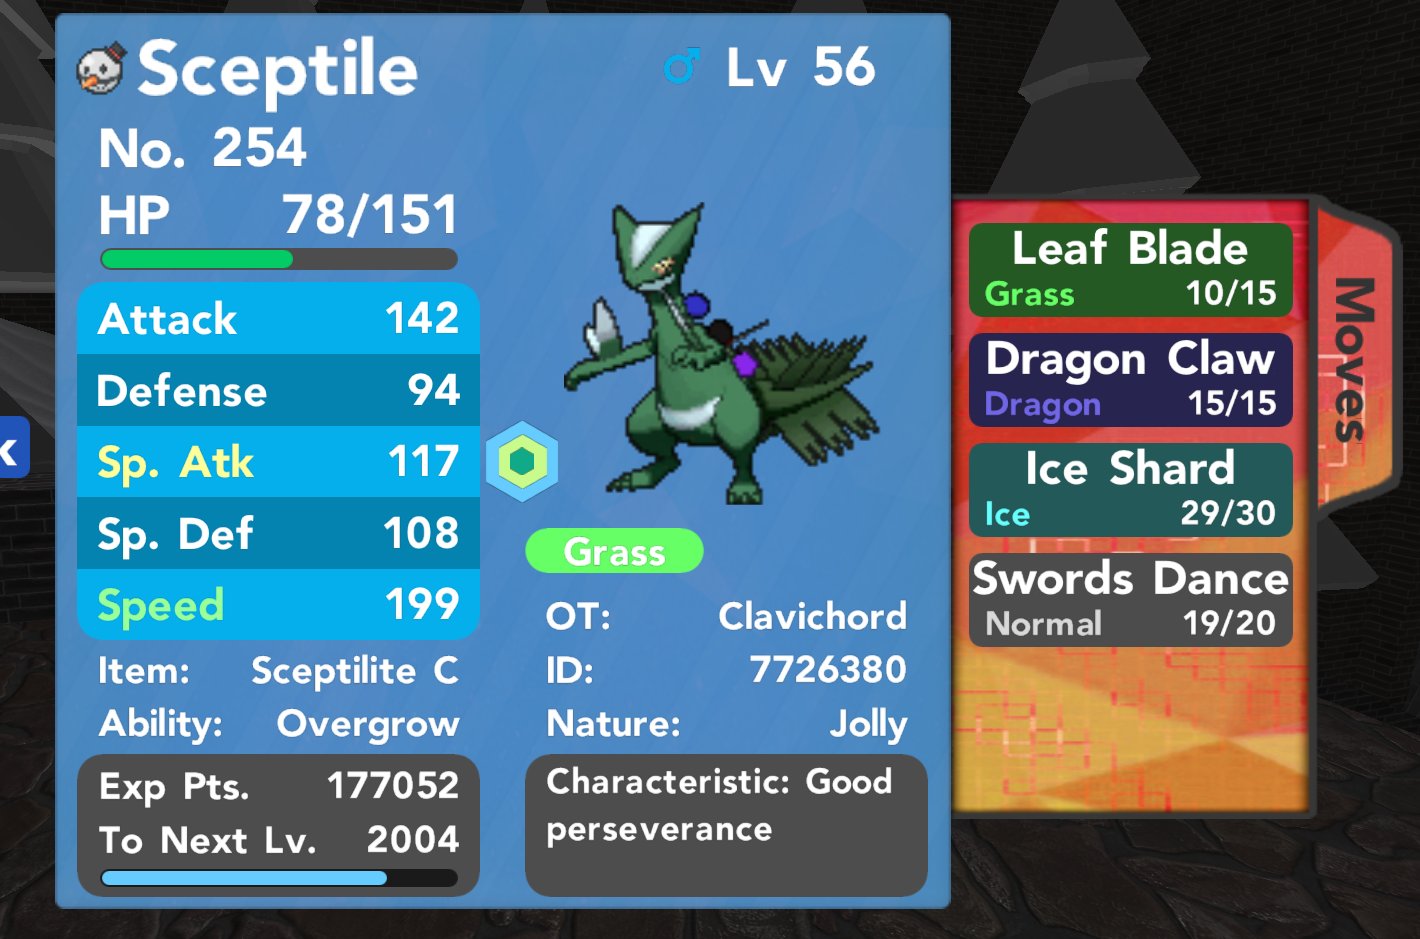 ✨mike✨ on "Giving away this EV-trained Sceptile C in a frosty ball holding a mega Sceptilite C stone. RT TO ENTER! Giveaway ends @ midnight on Christmas. Winner will be